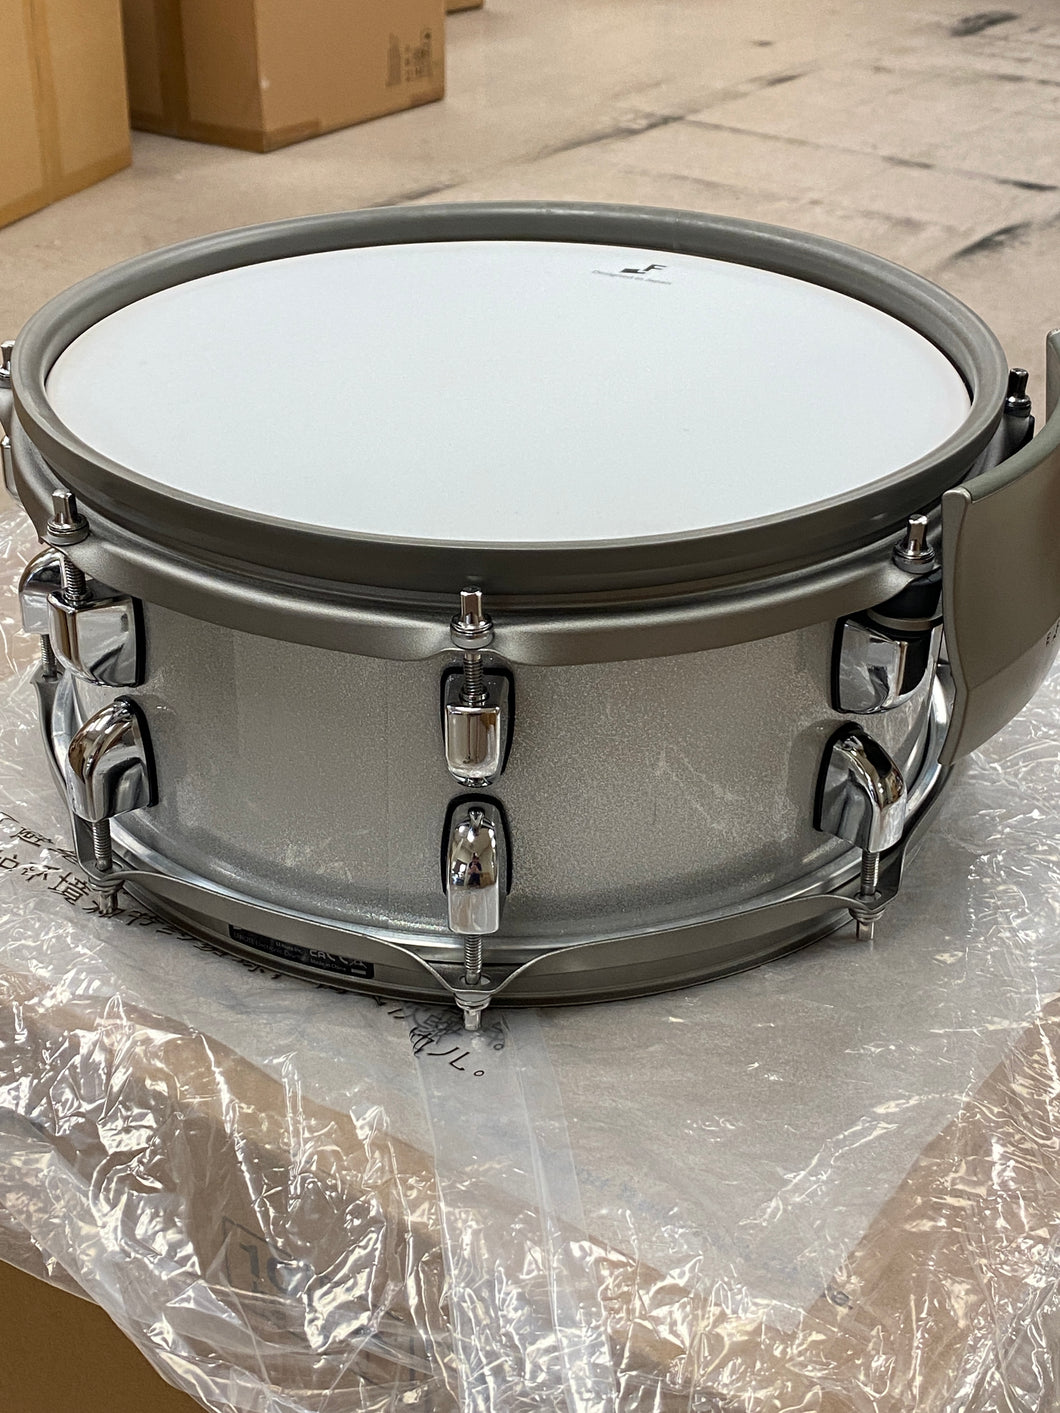 Efnote EFD-S12-WS Electronic Snare Drum - USED#0001